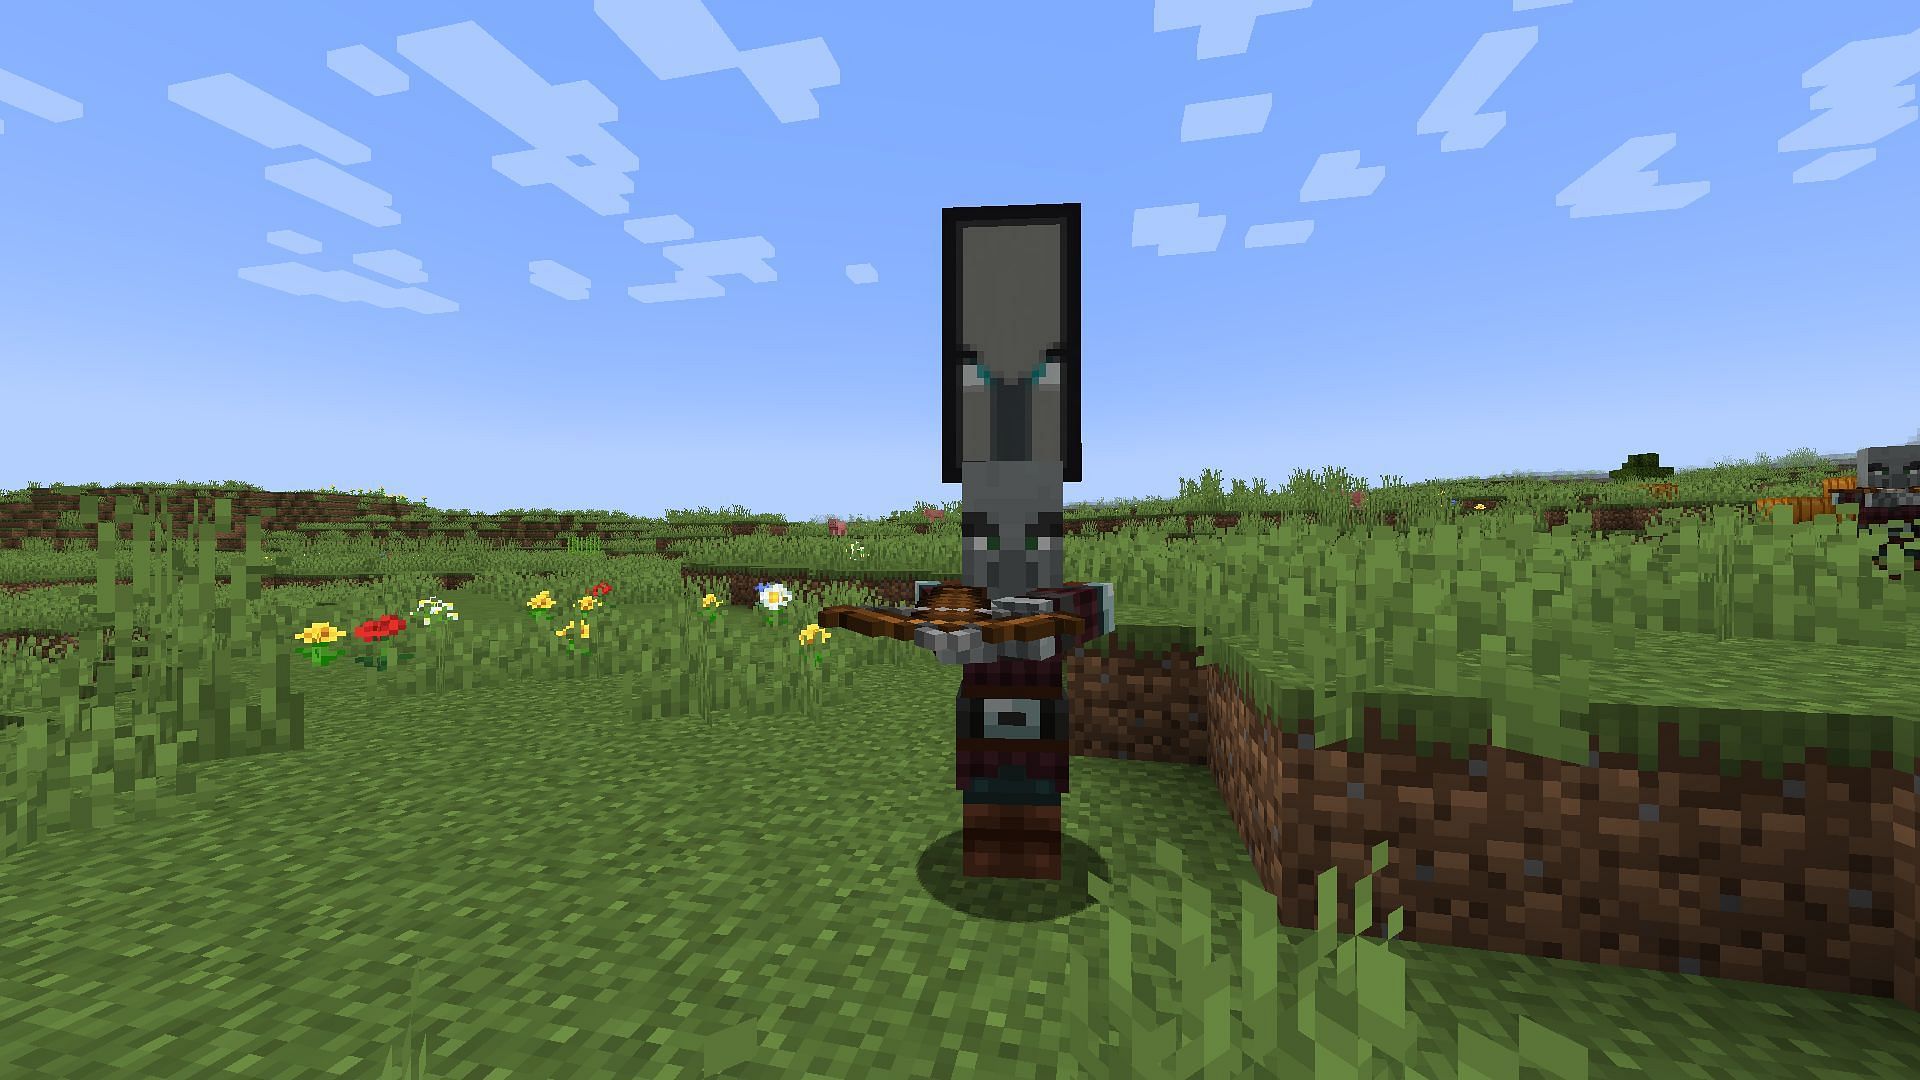 Raid captain will now drop an ominous bottle rather than applying bad omen directly. (Image via Mojang Studios)